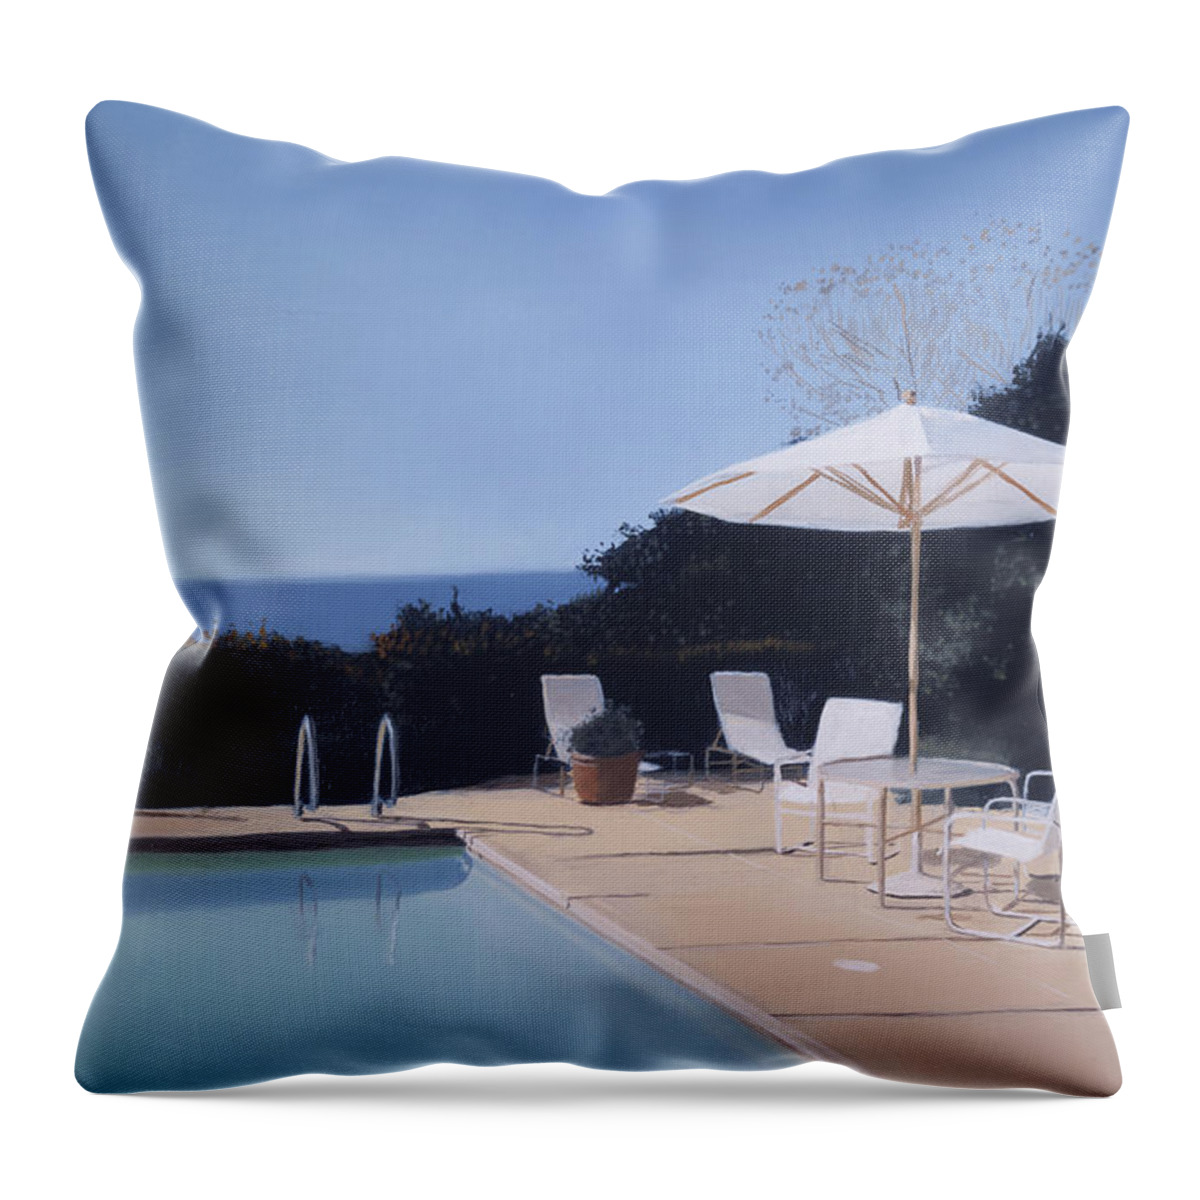 Pool Throw Pillow featuring the painting Rah 2973686 by Alessandro Raho